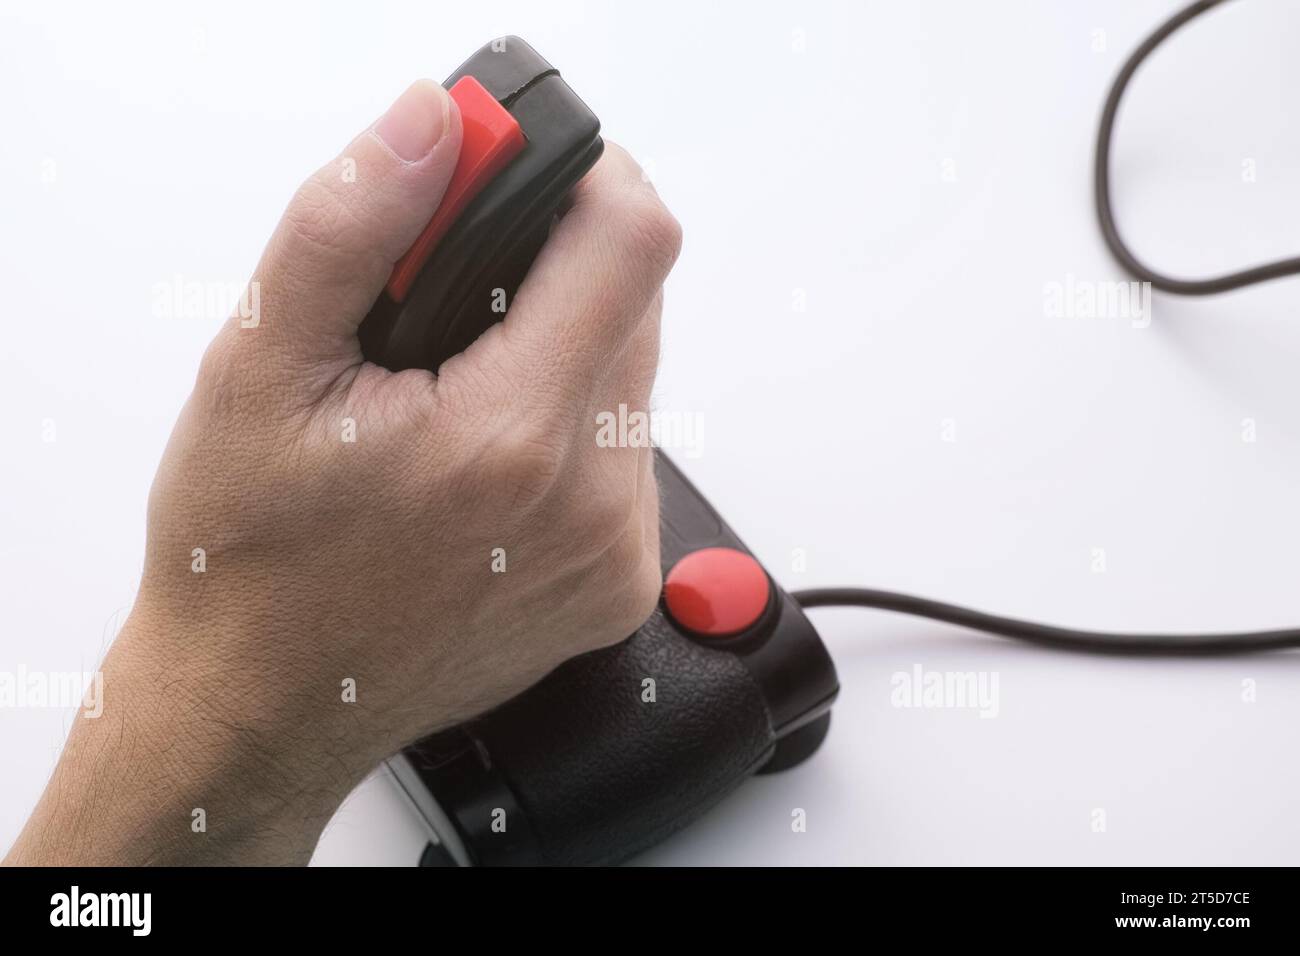 A man playing a video game with a retro joystick. Gaming joystick from the mid-1980s. Stock Photo